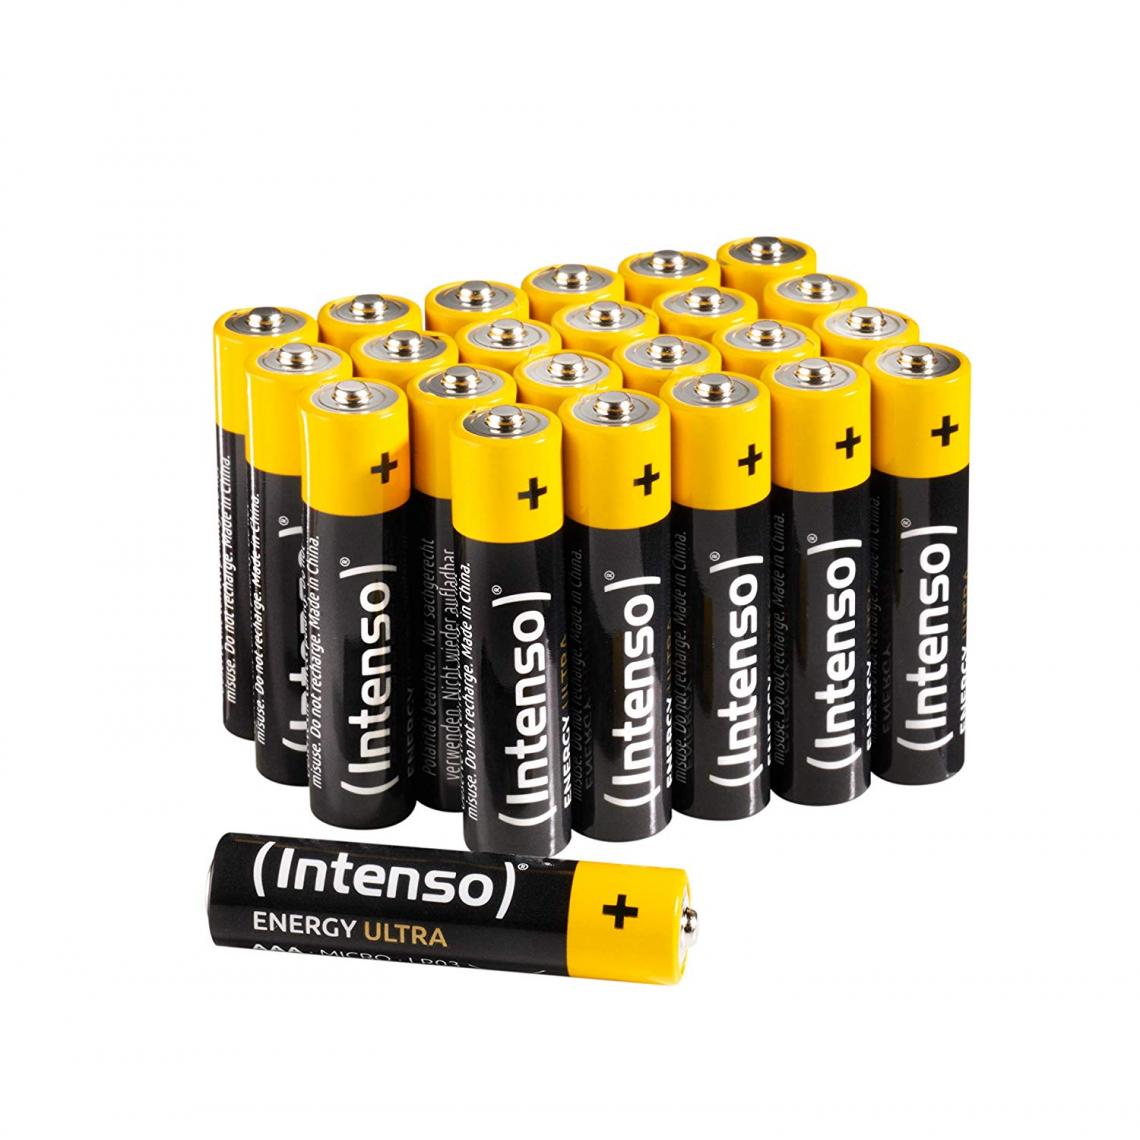 Ina - Pile LR03 (AAA) alcaline(s) Intenso Energy-Ultra 1.5 V 24 pc(s) - Piles standard